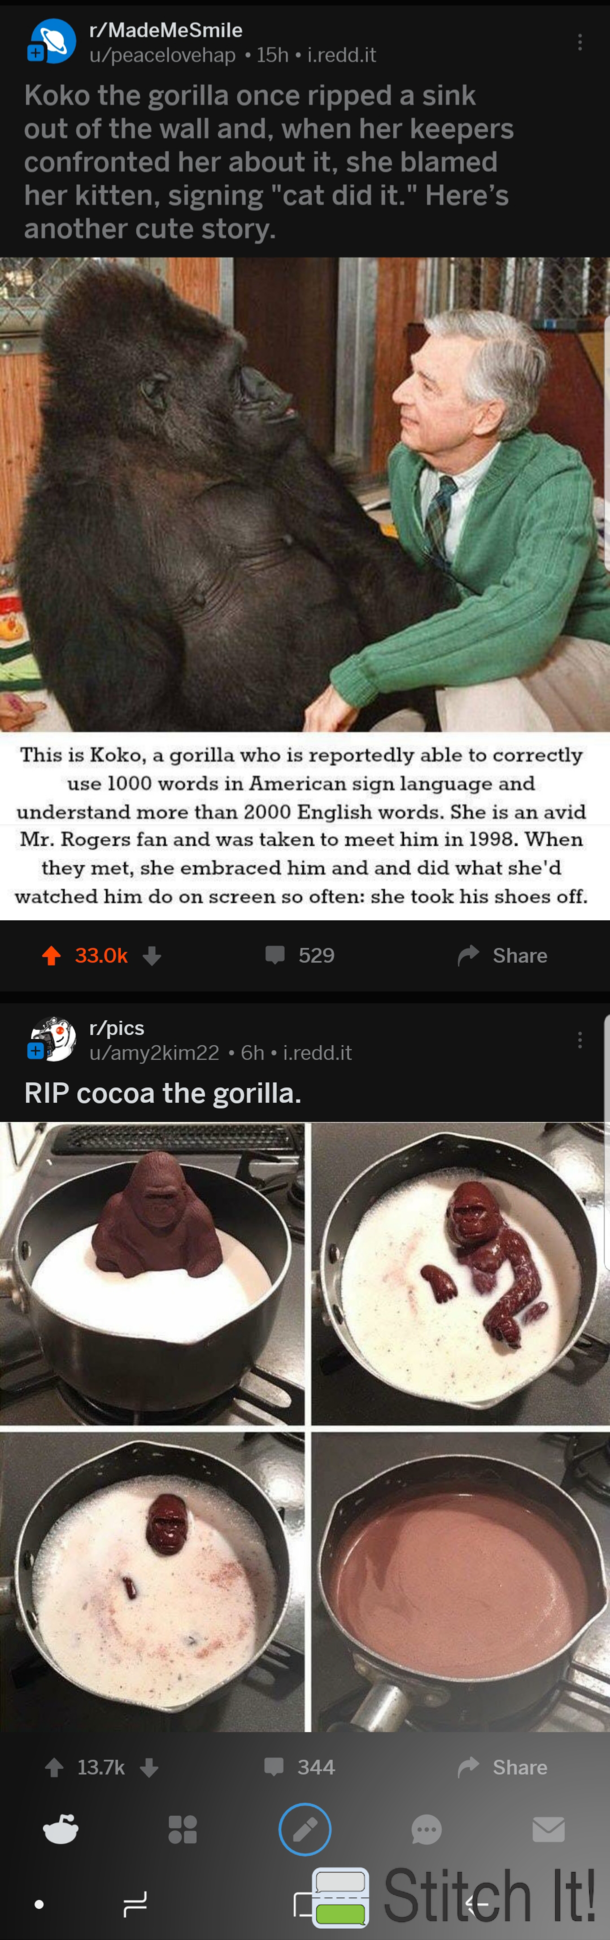 The order that these two posts were in